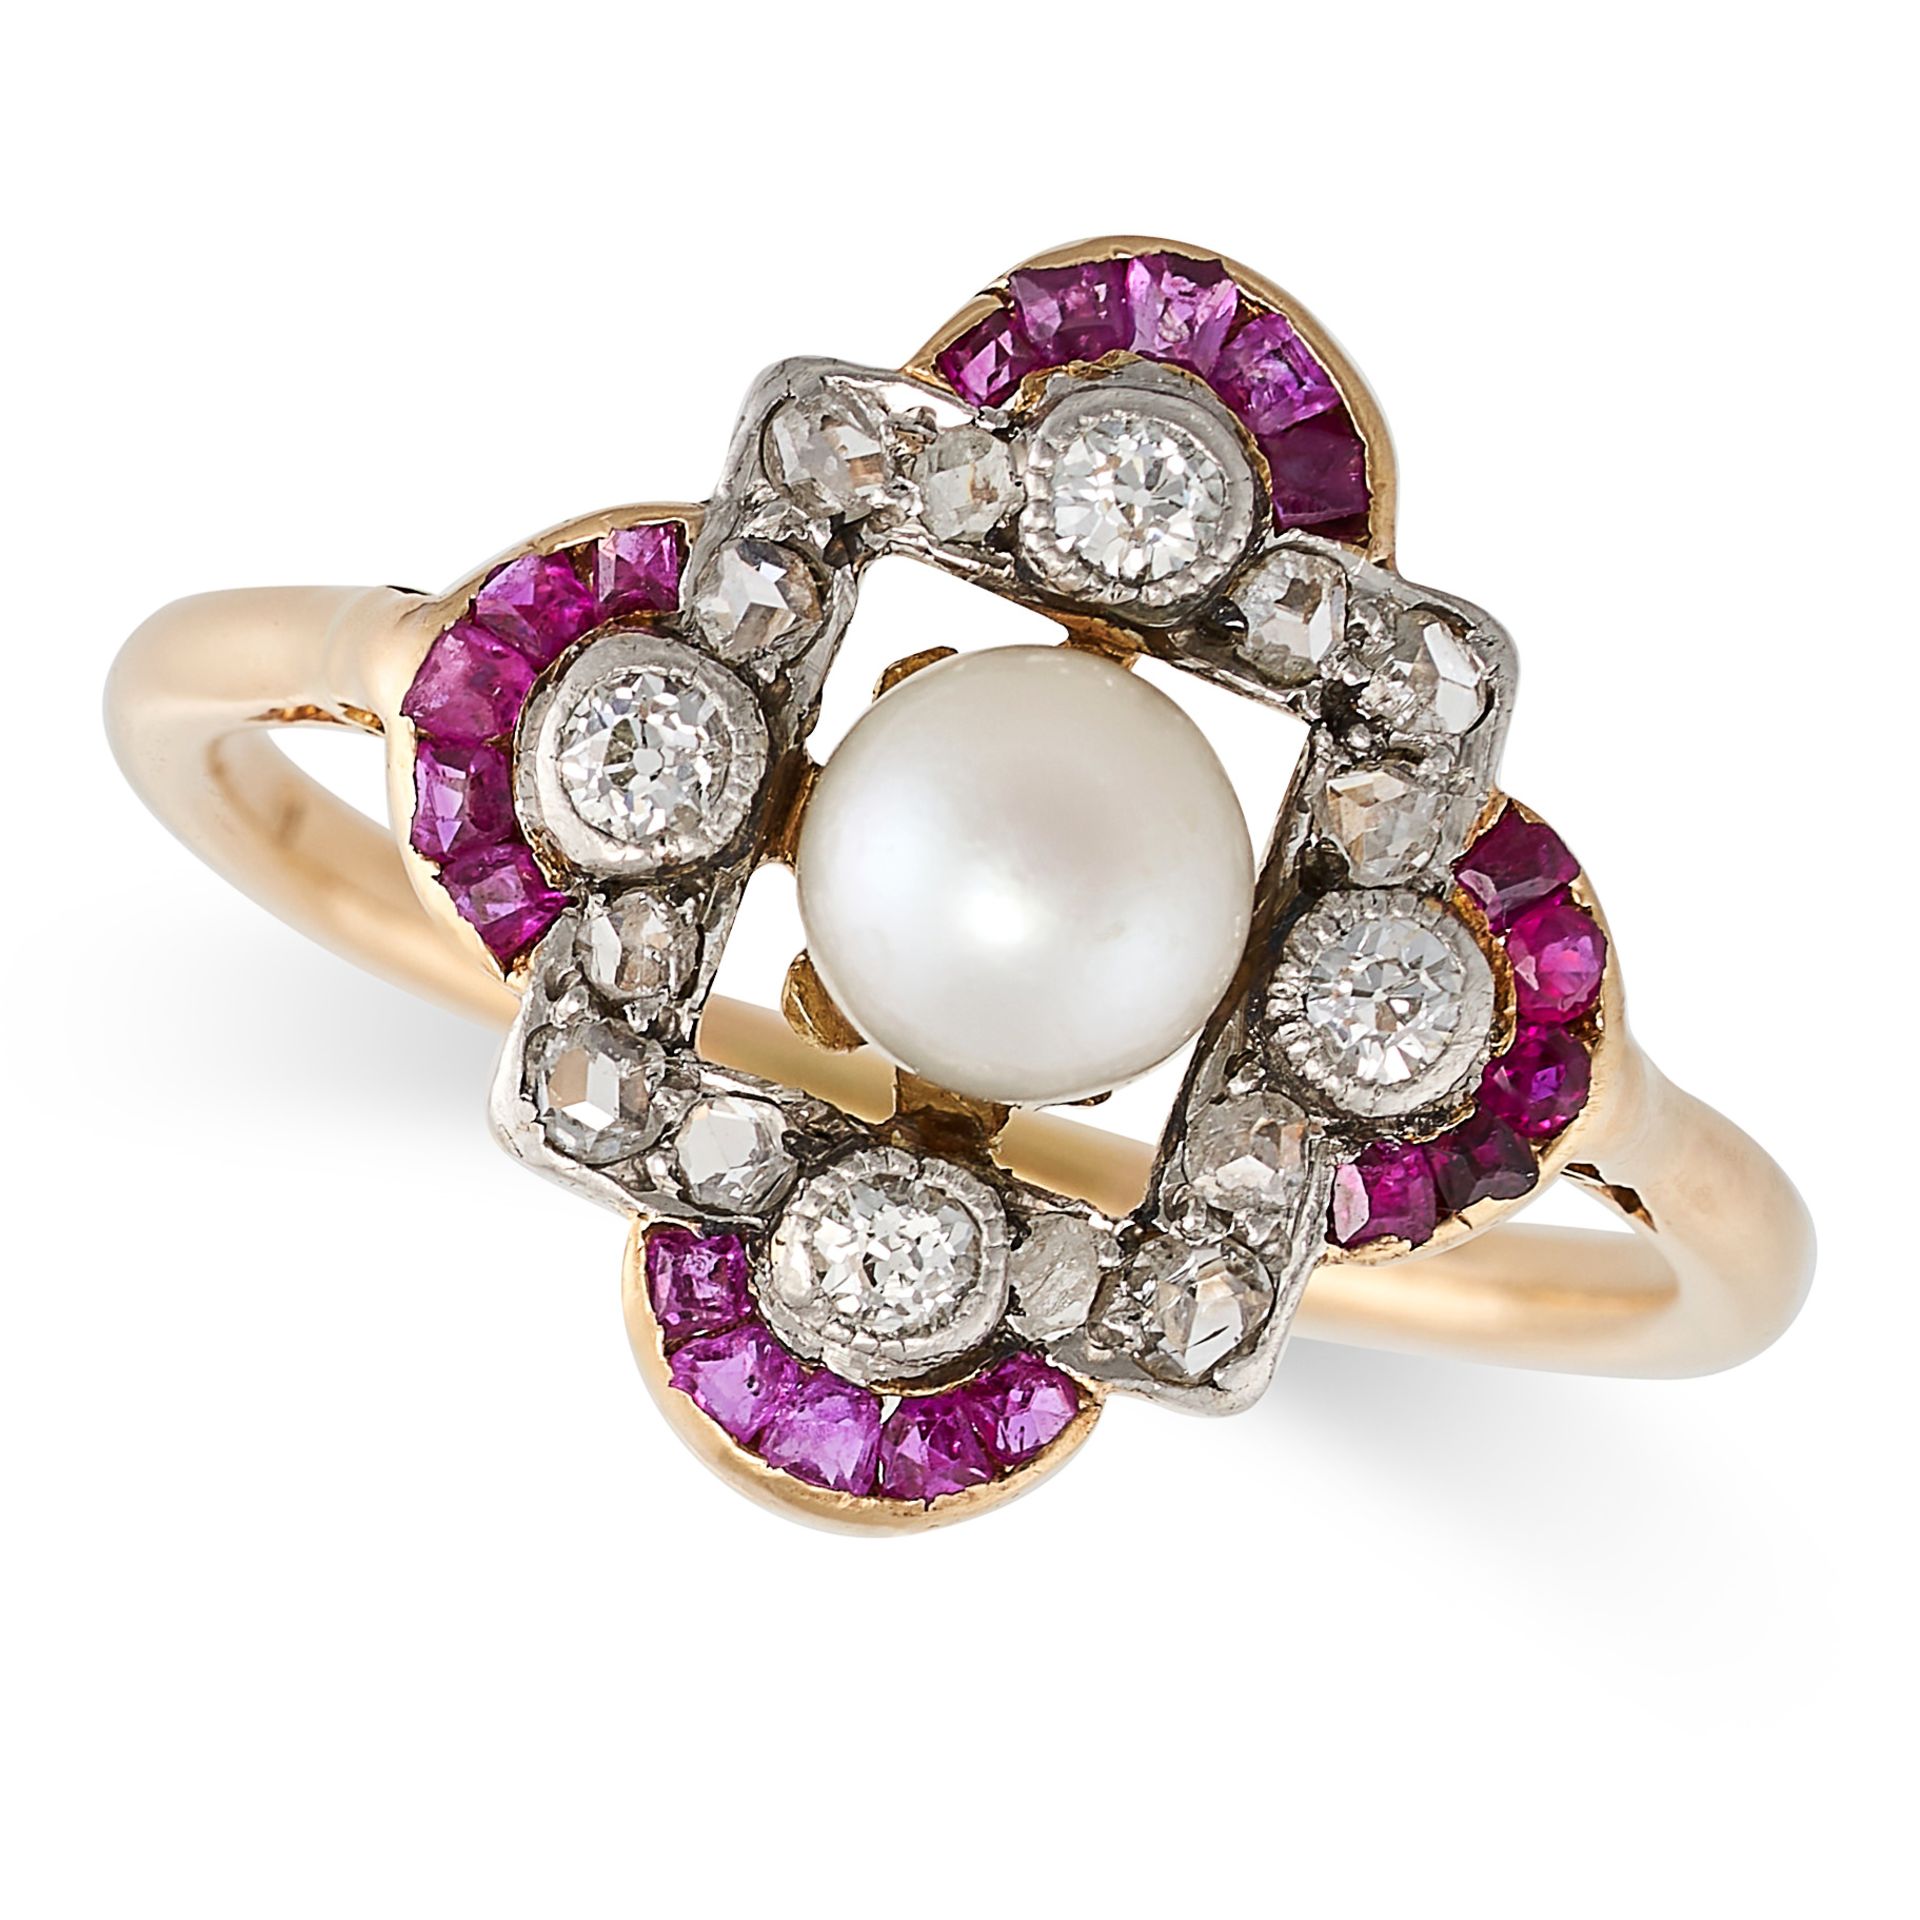 A PEARL, DIAMOND AND RUBY RING in 14ct yellow gold, set with a pearl of 5.0mm in a border of old ...